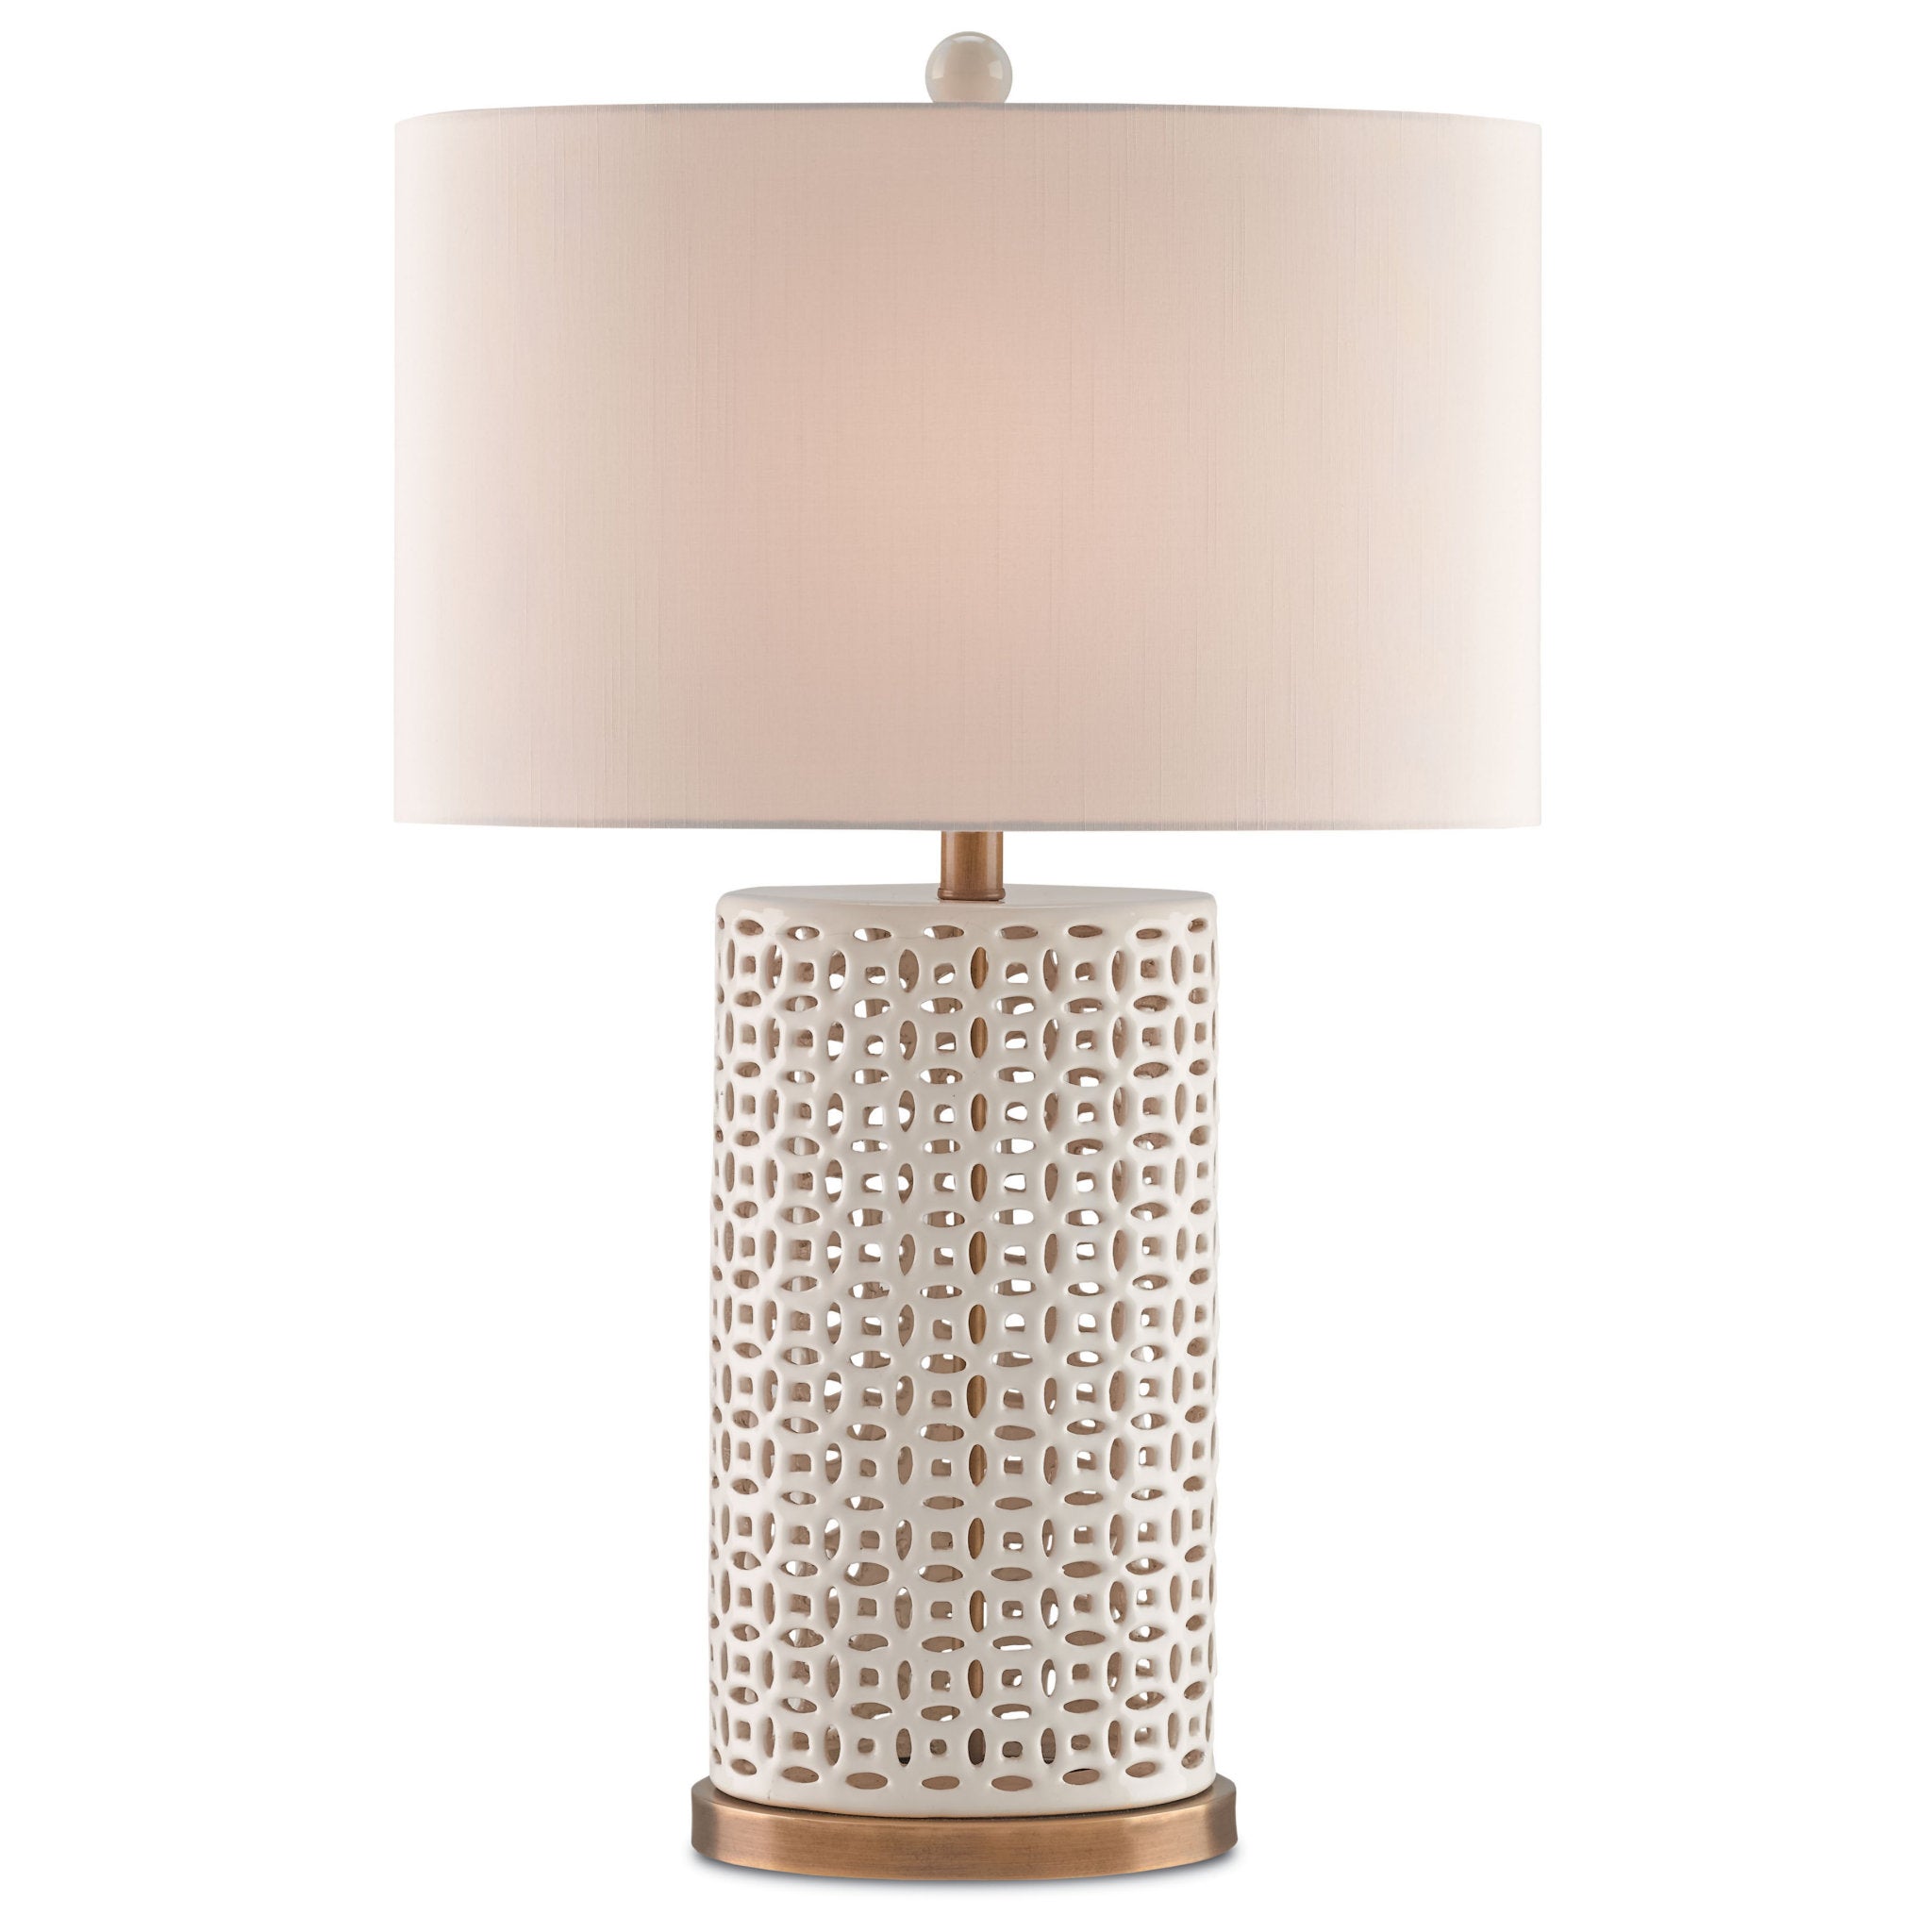 Bellemeade White Table Lamp - Ivory/Antique Brass